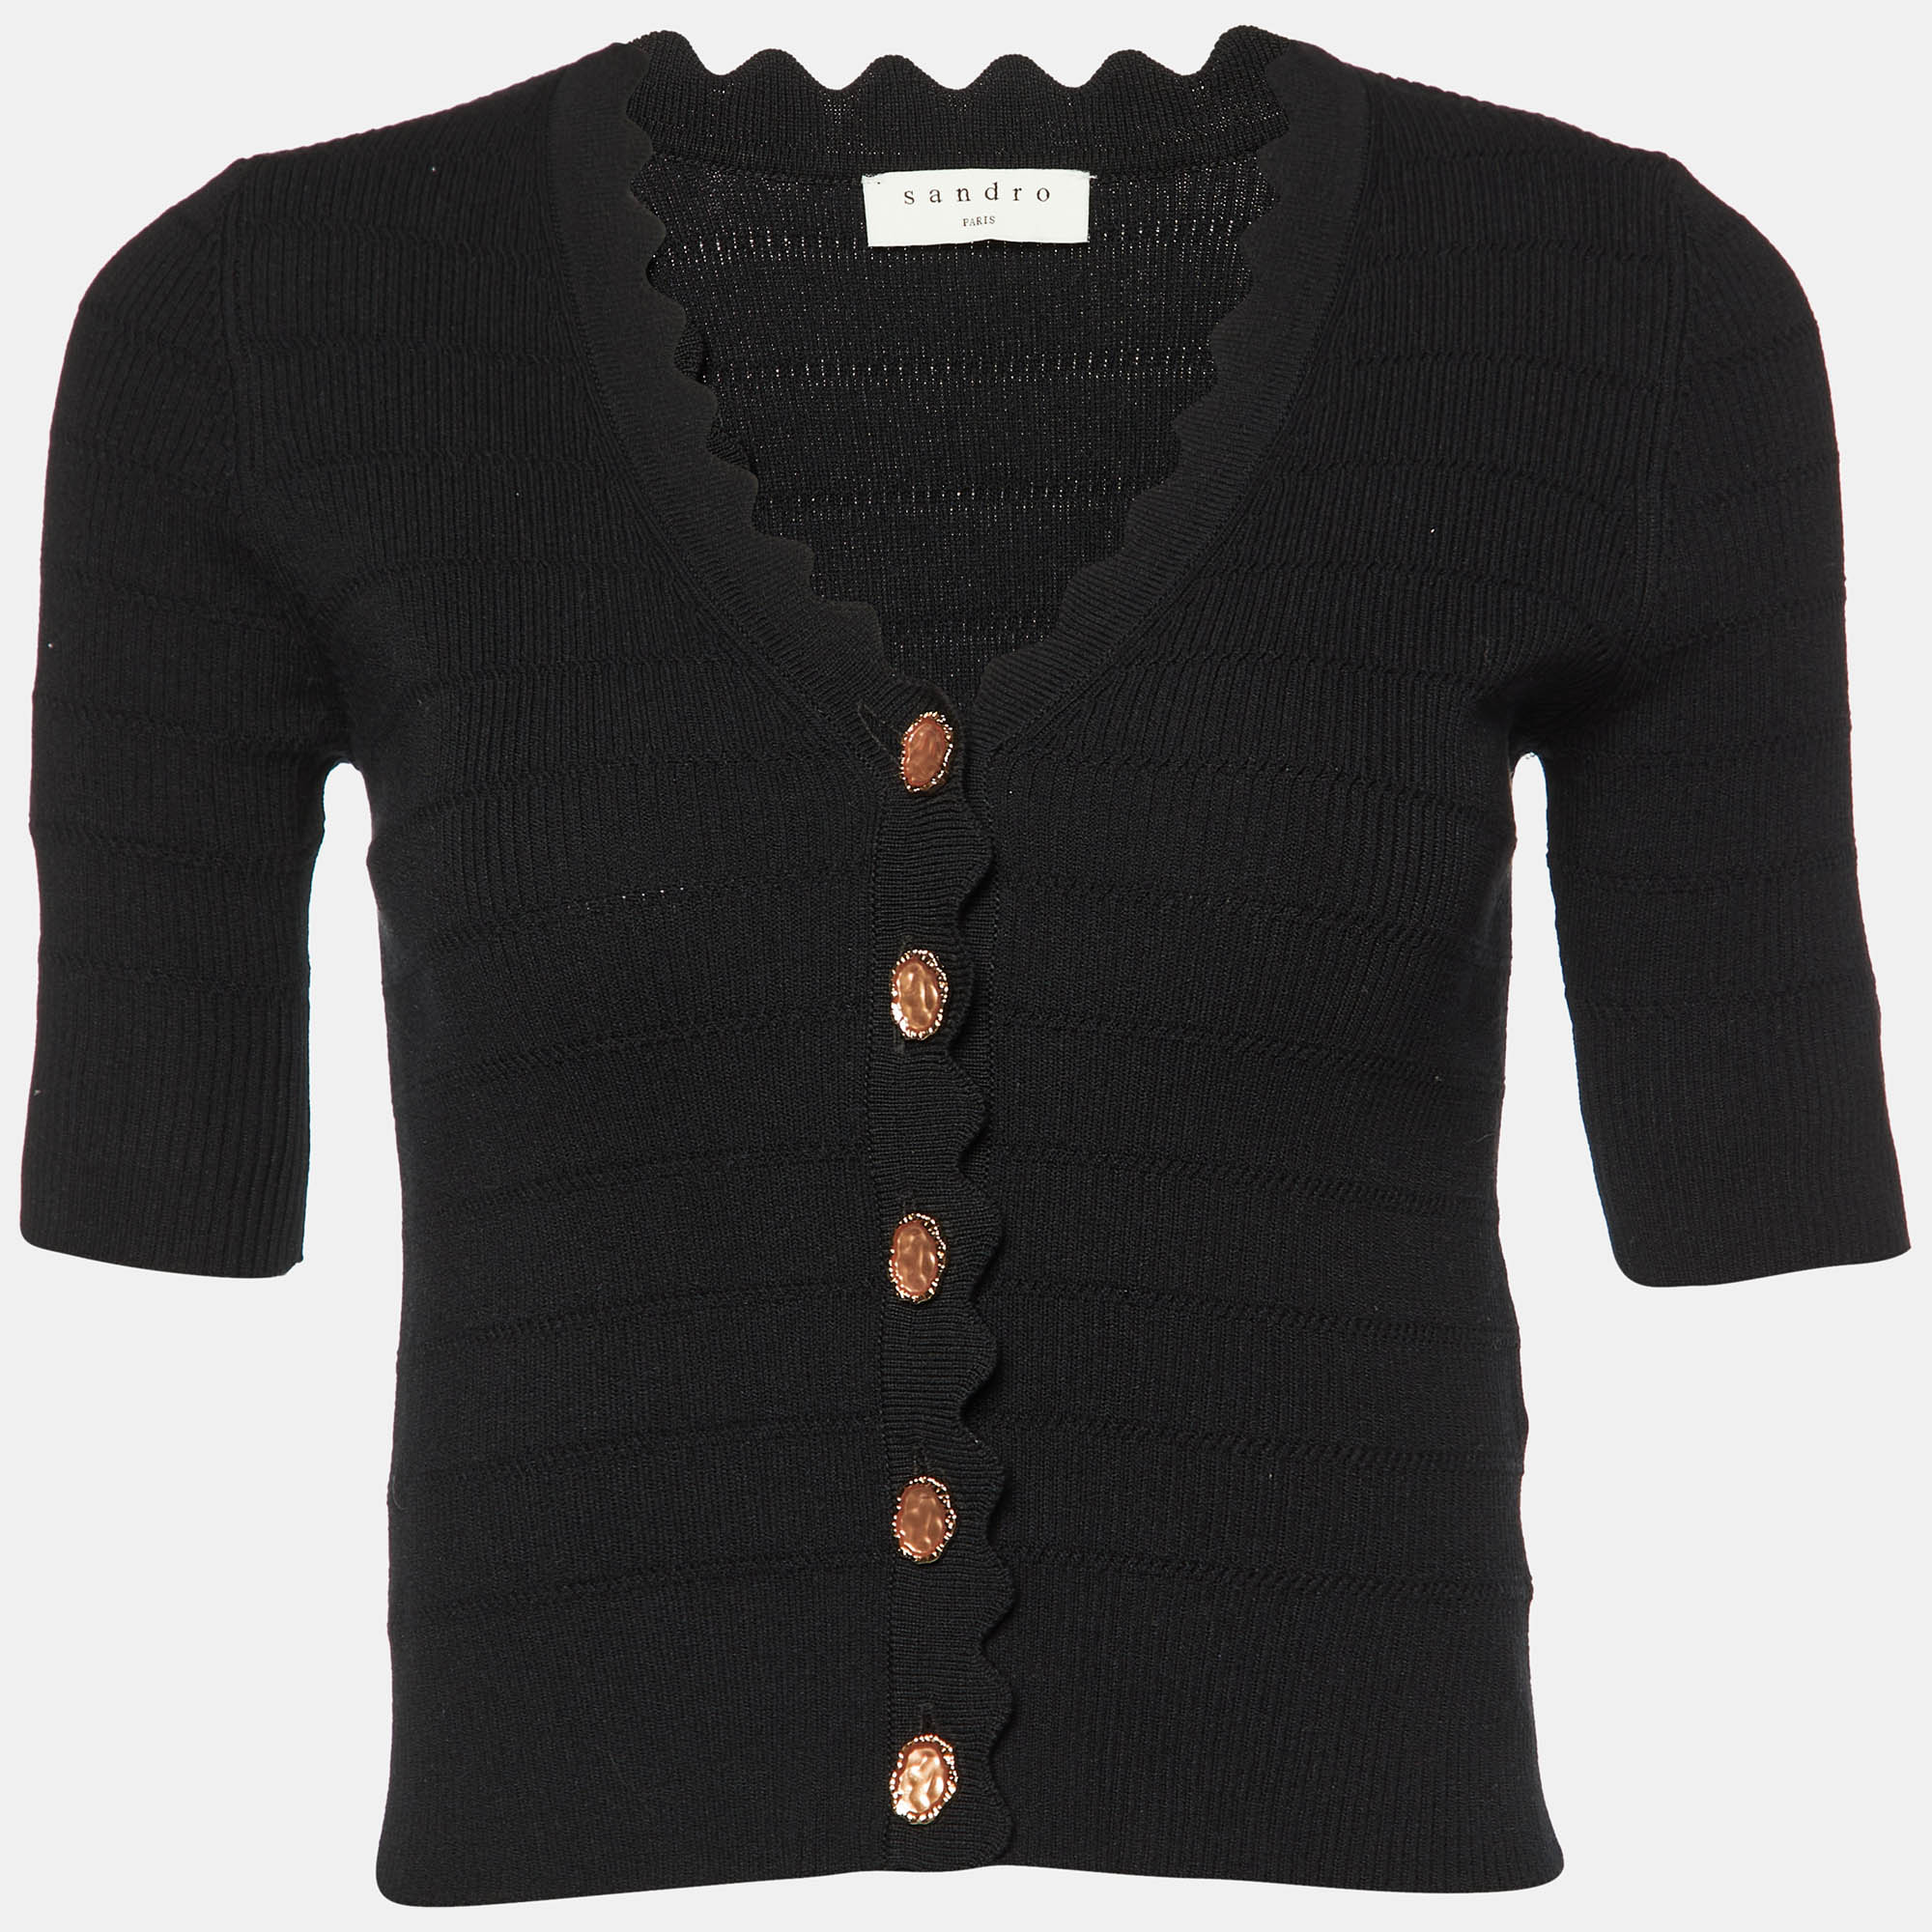 Sandro black knit cropped top s